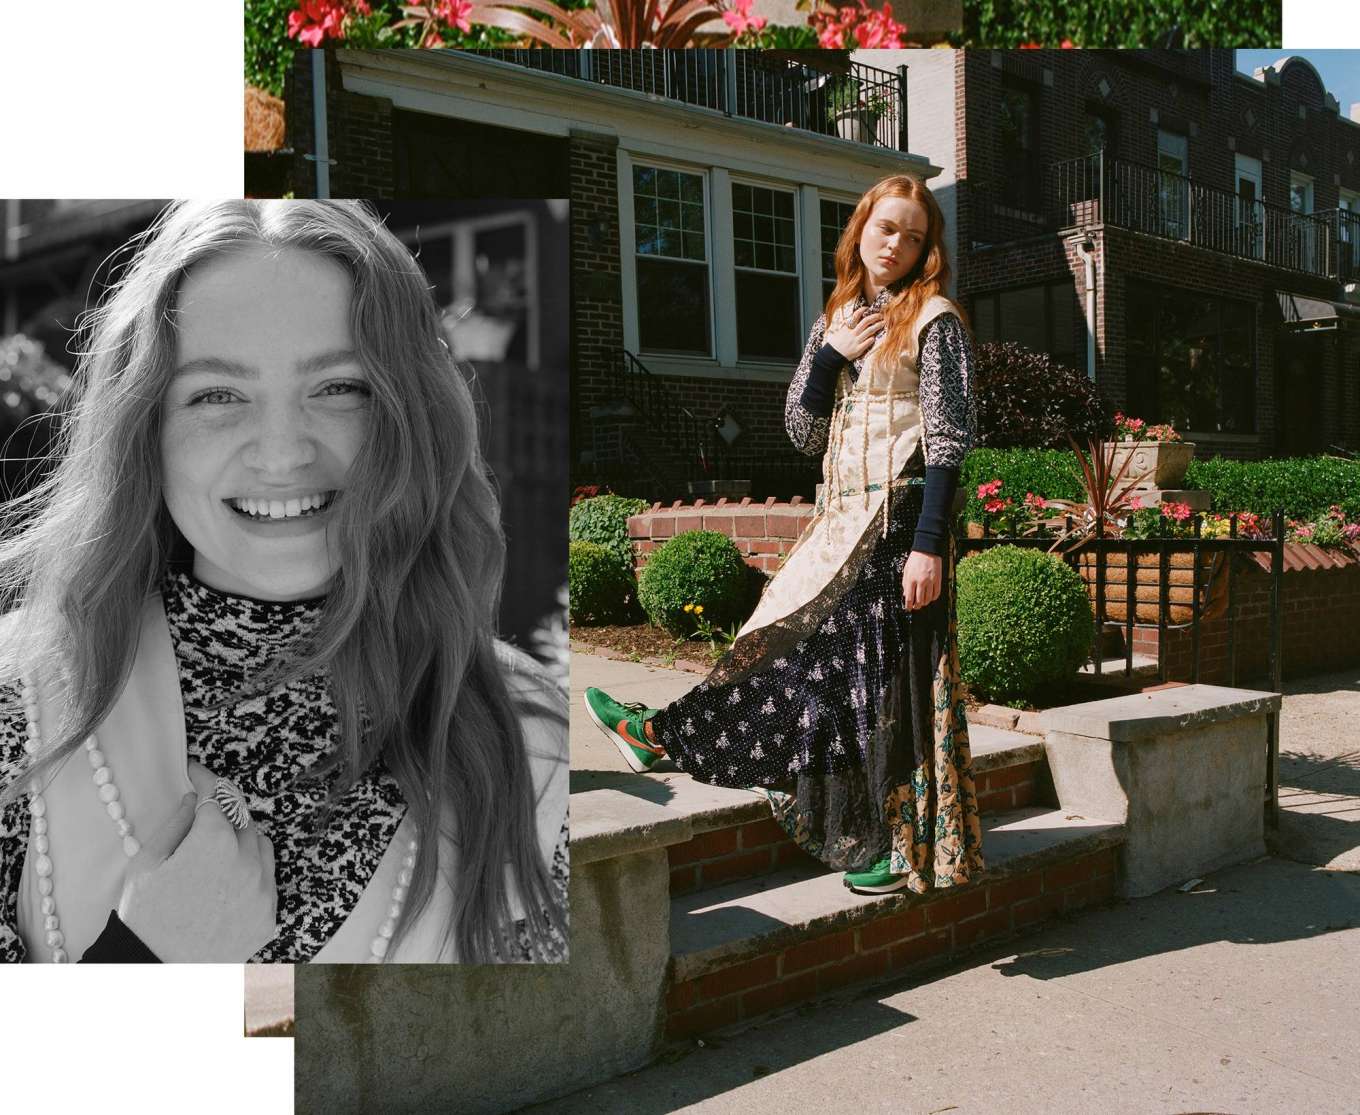 Sadie Sink For Who What Wear Magazine (July 2019)